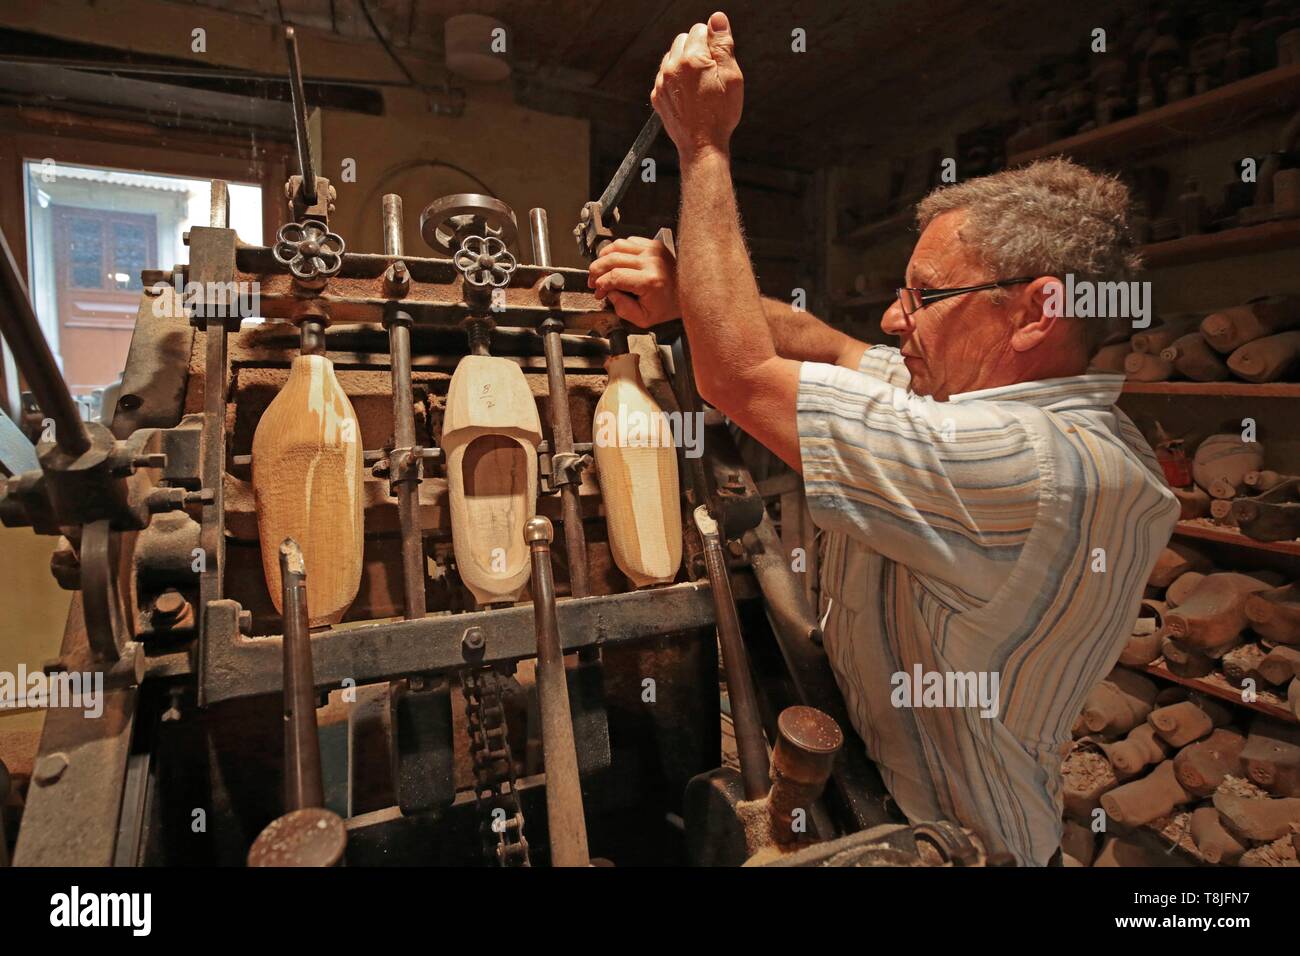 France, Haut Rhin, Lutterbach, sabotery Andre Haeberle, shoe maker Andre Haeberle at work, demonstration commented in front of visitors, his shoes are made of maple wood Stock Photo